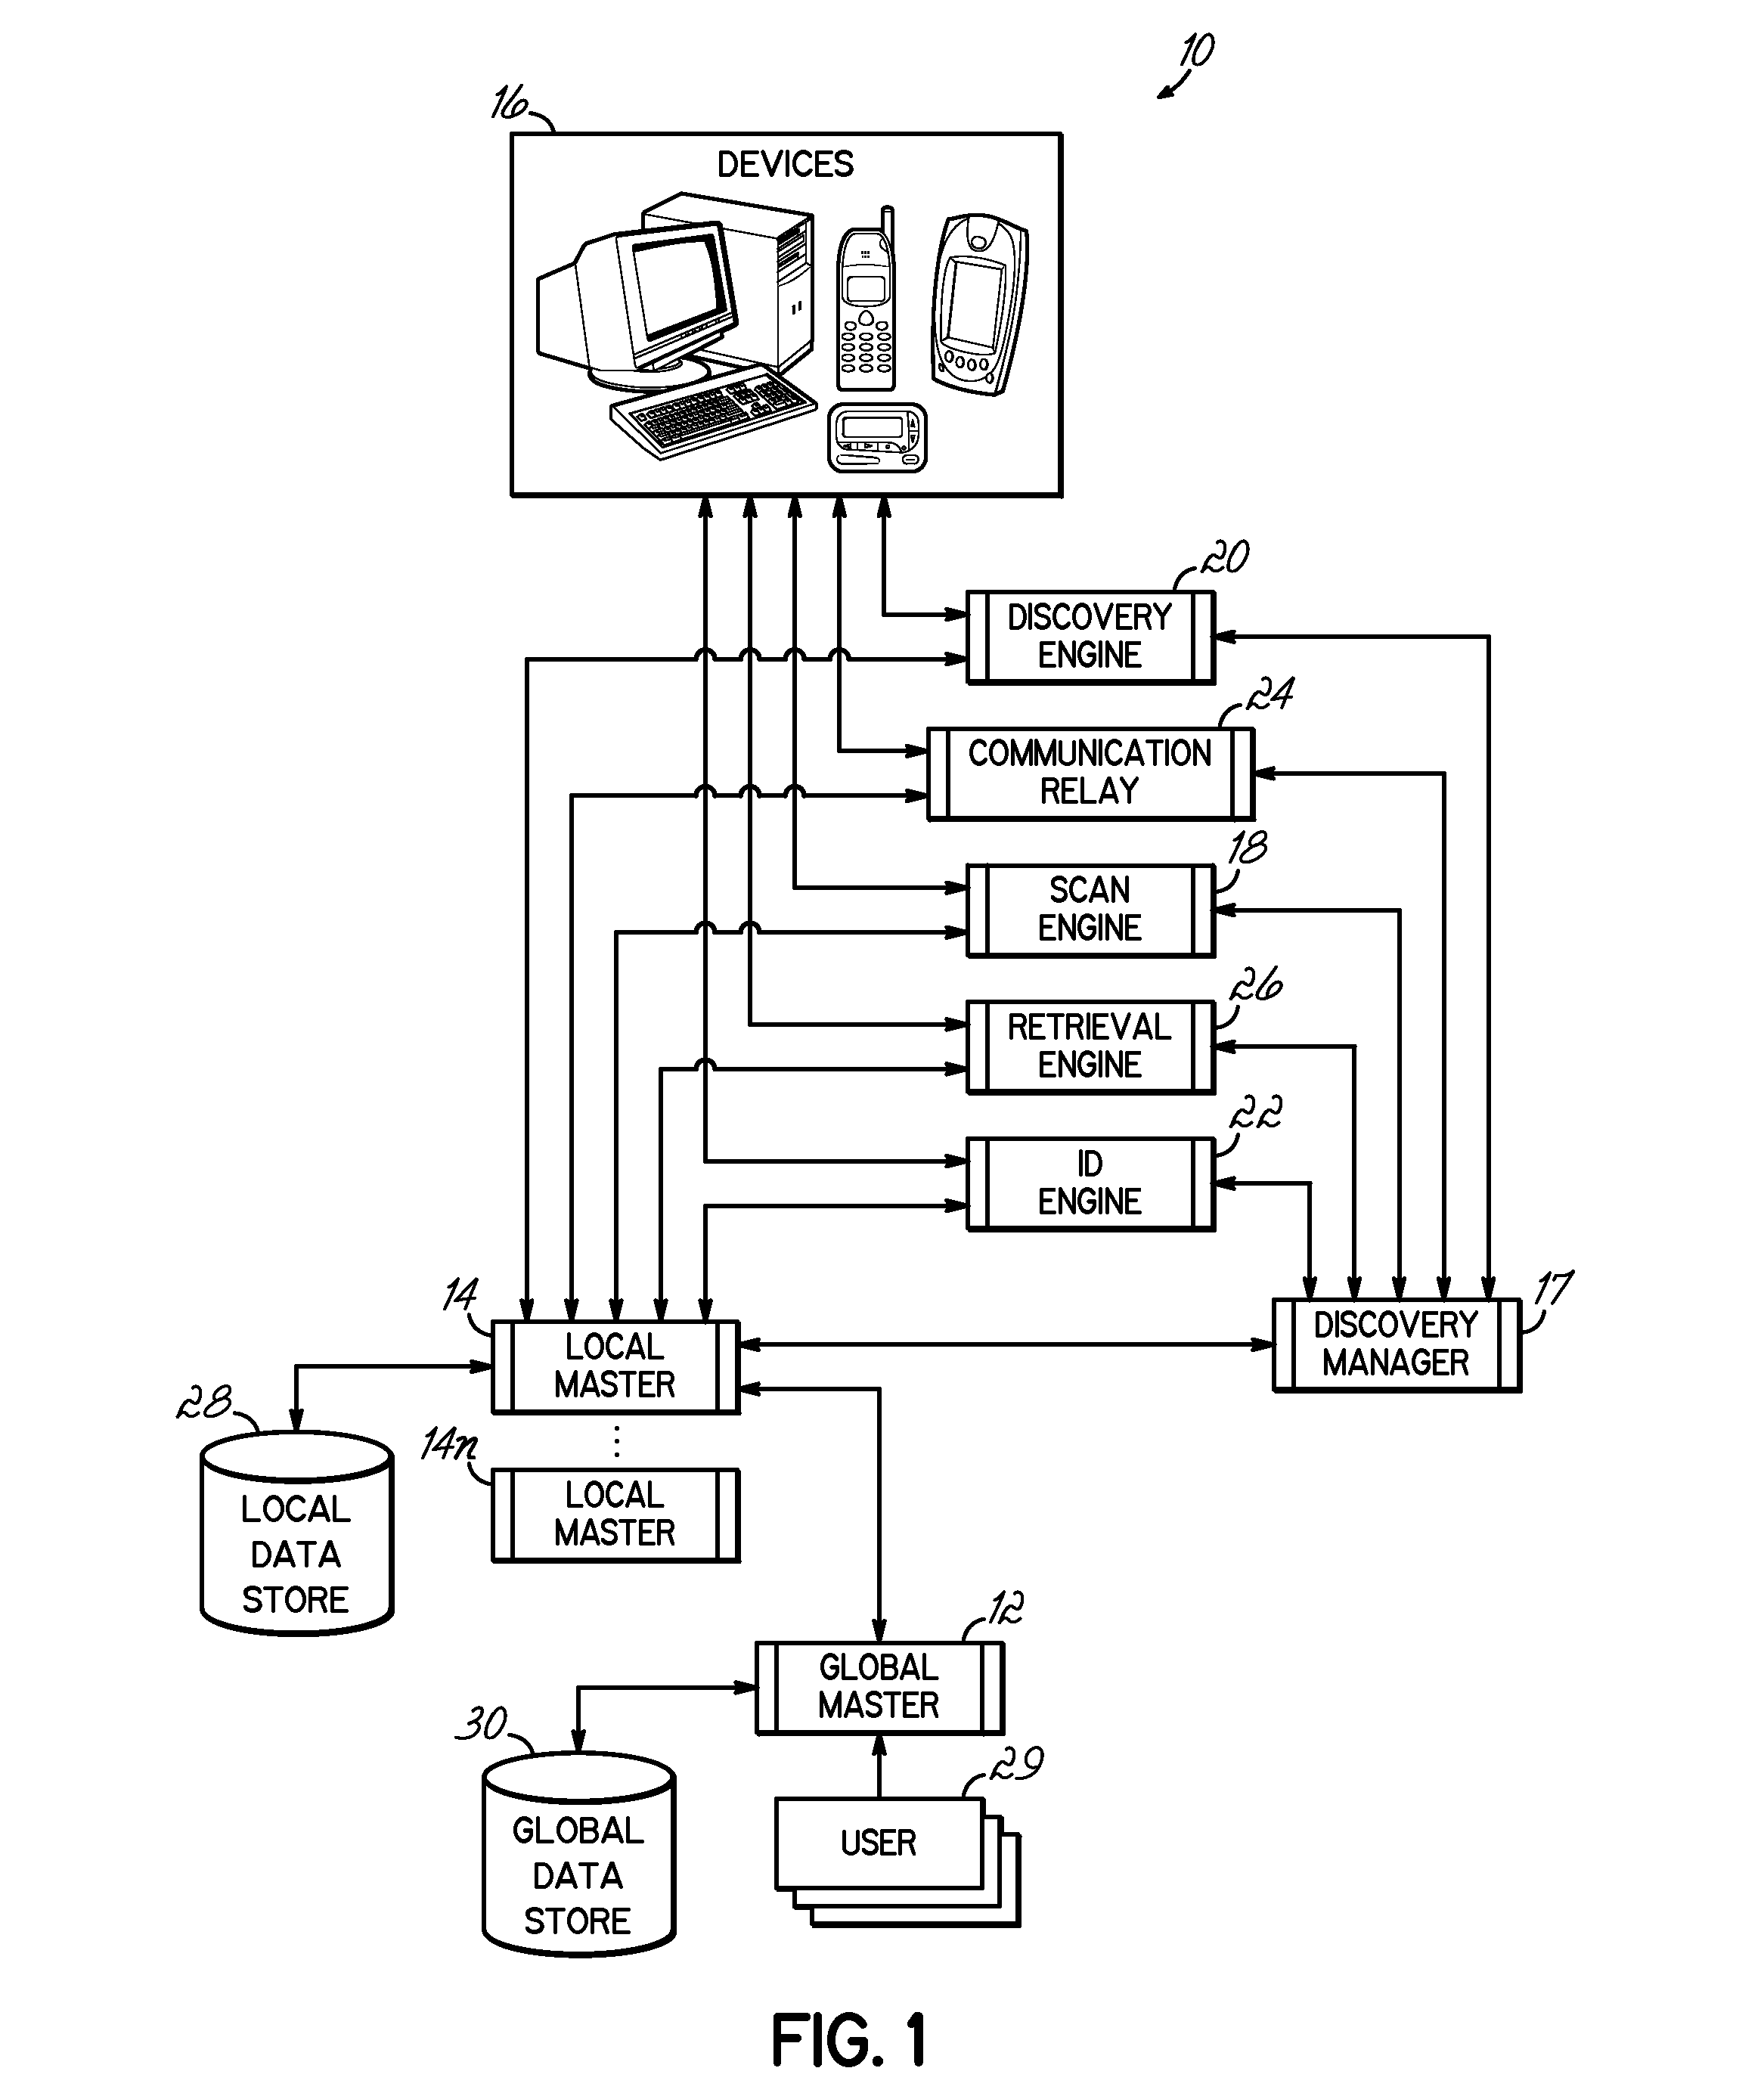 Network device inventory system